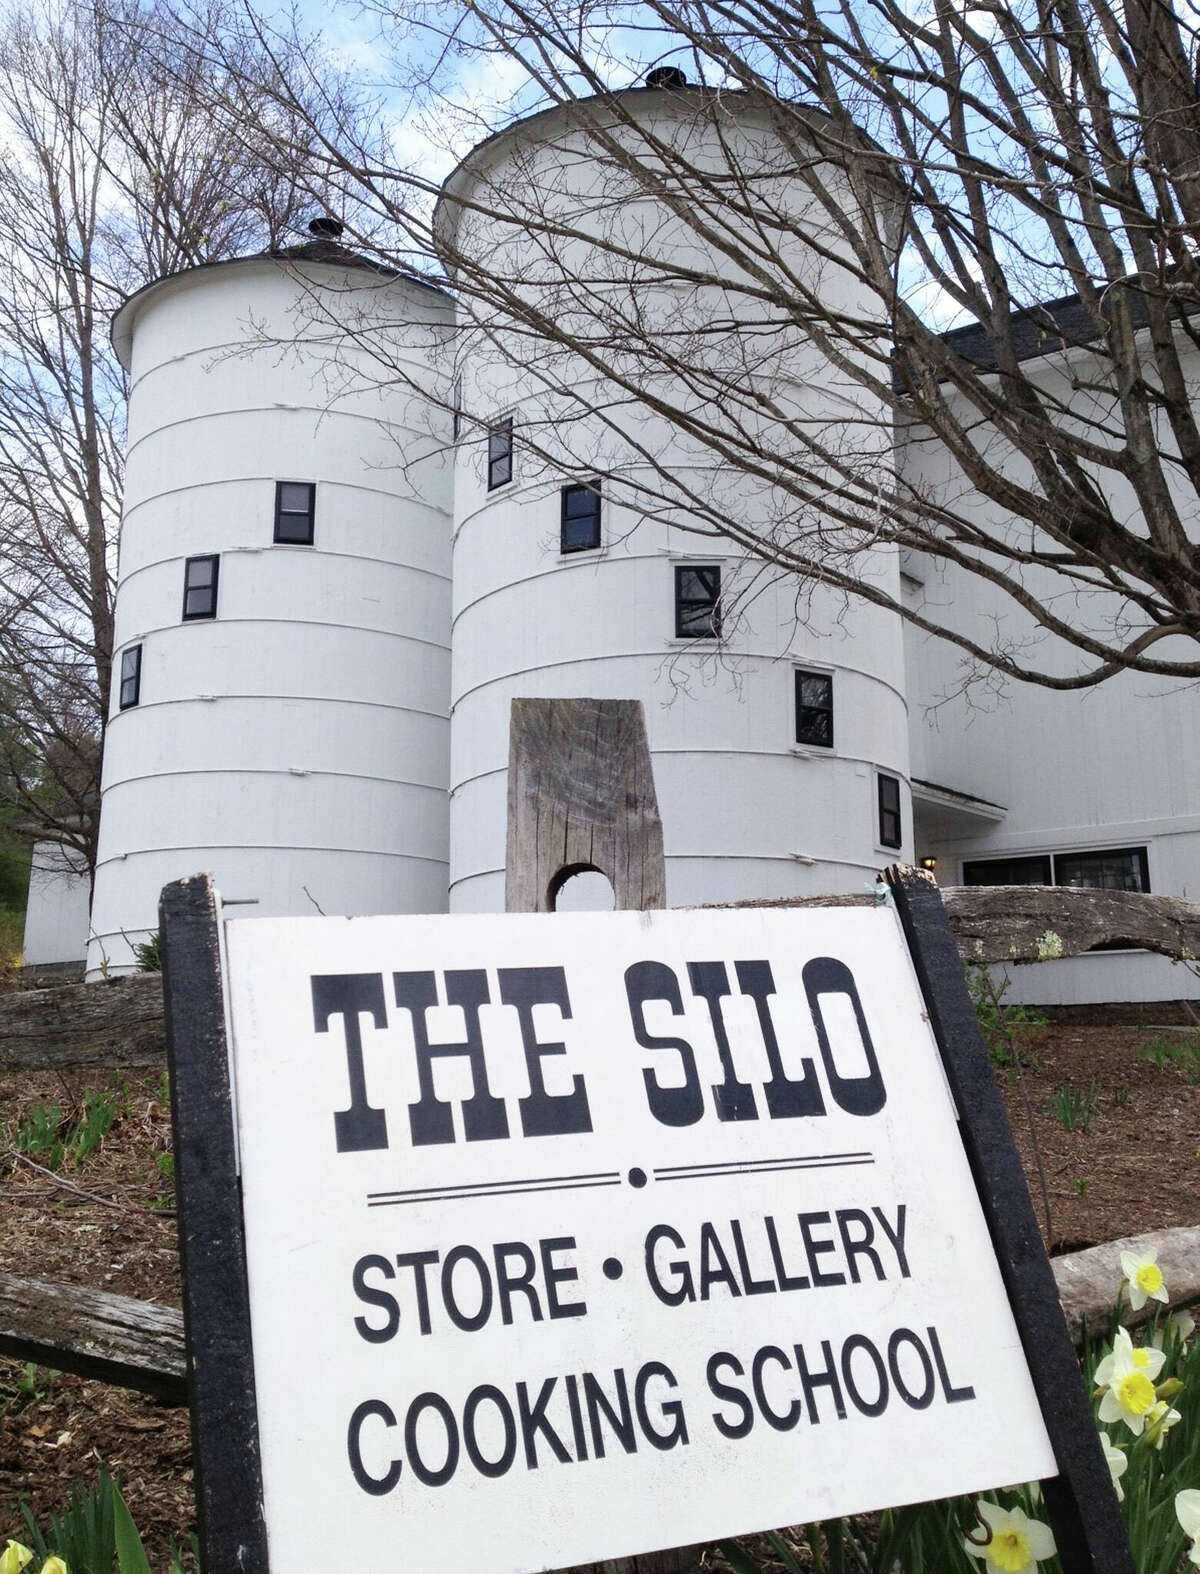 Located at 44 Upland Road, The Silo, a New Milford nonprofit, received town approval to use $107,500 in ARPA funds to bring the nonprofit's facilities up to code.